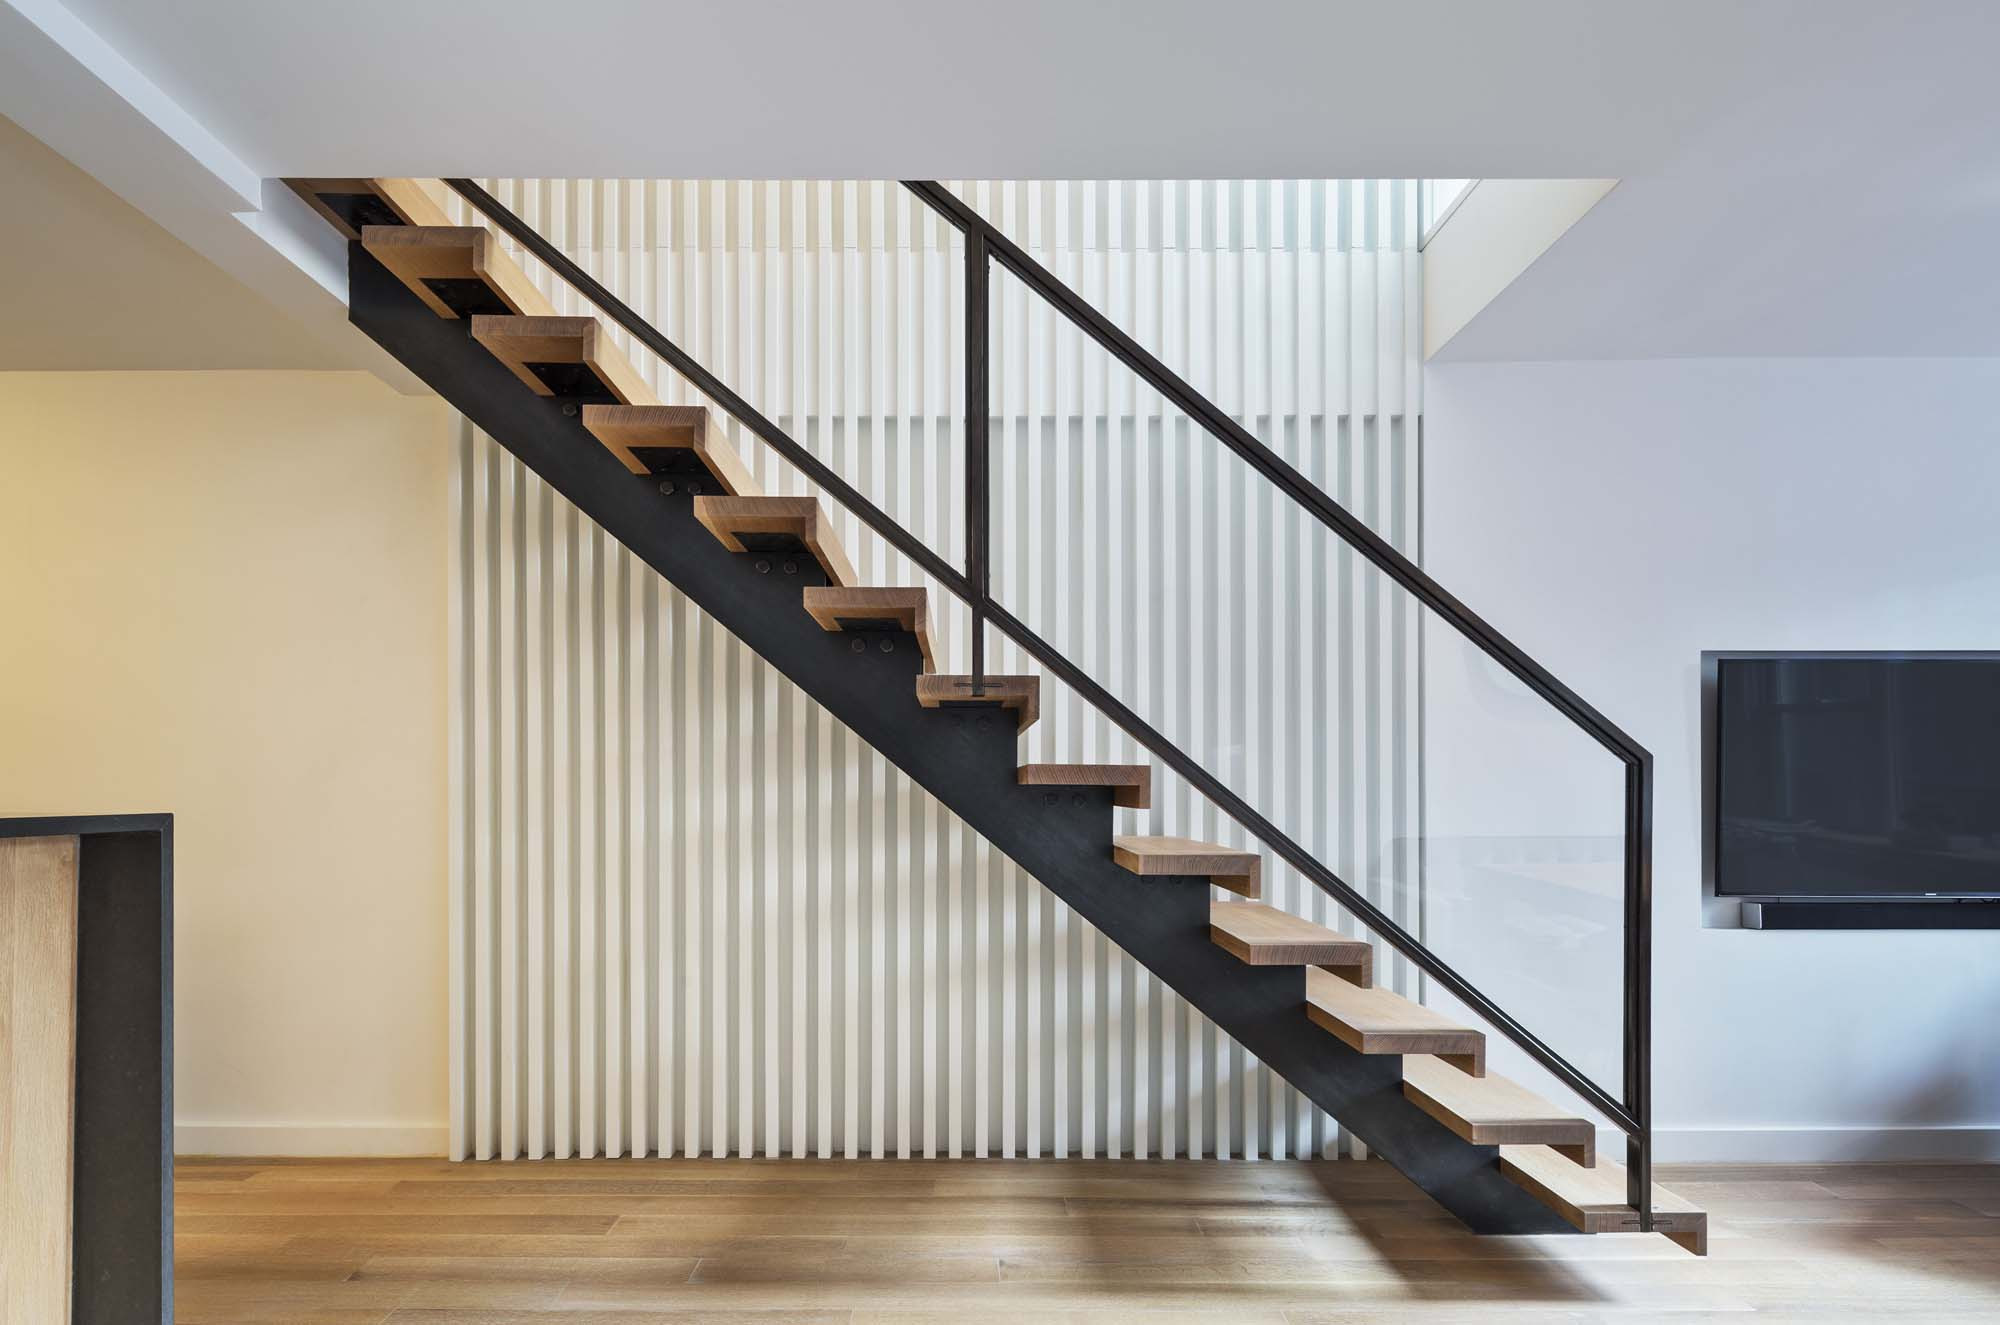 Specifications for Building Circular Staircases - The Chicago Curve